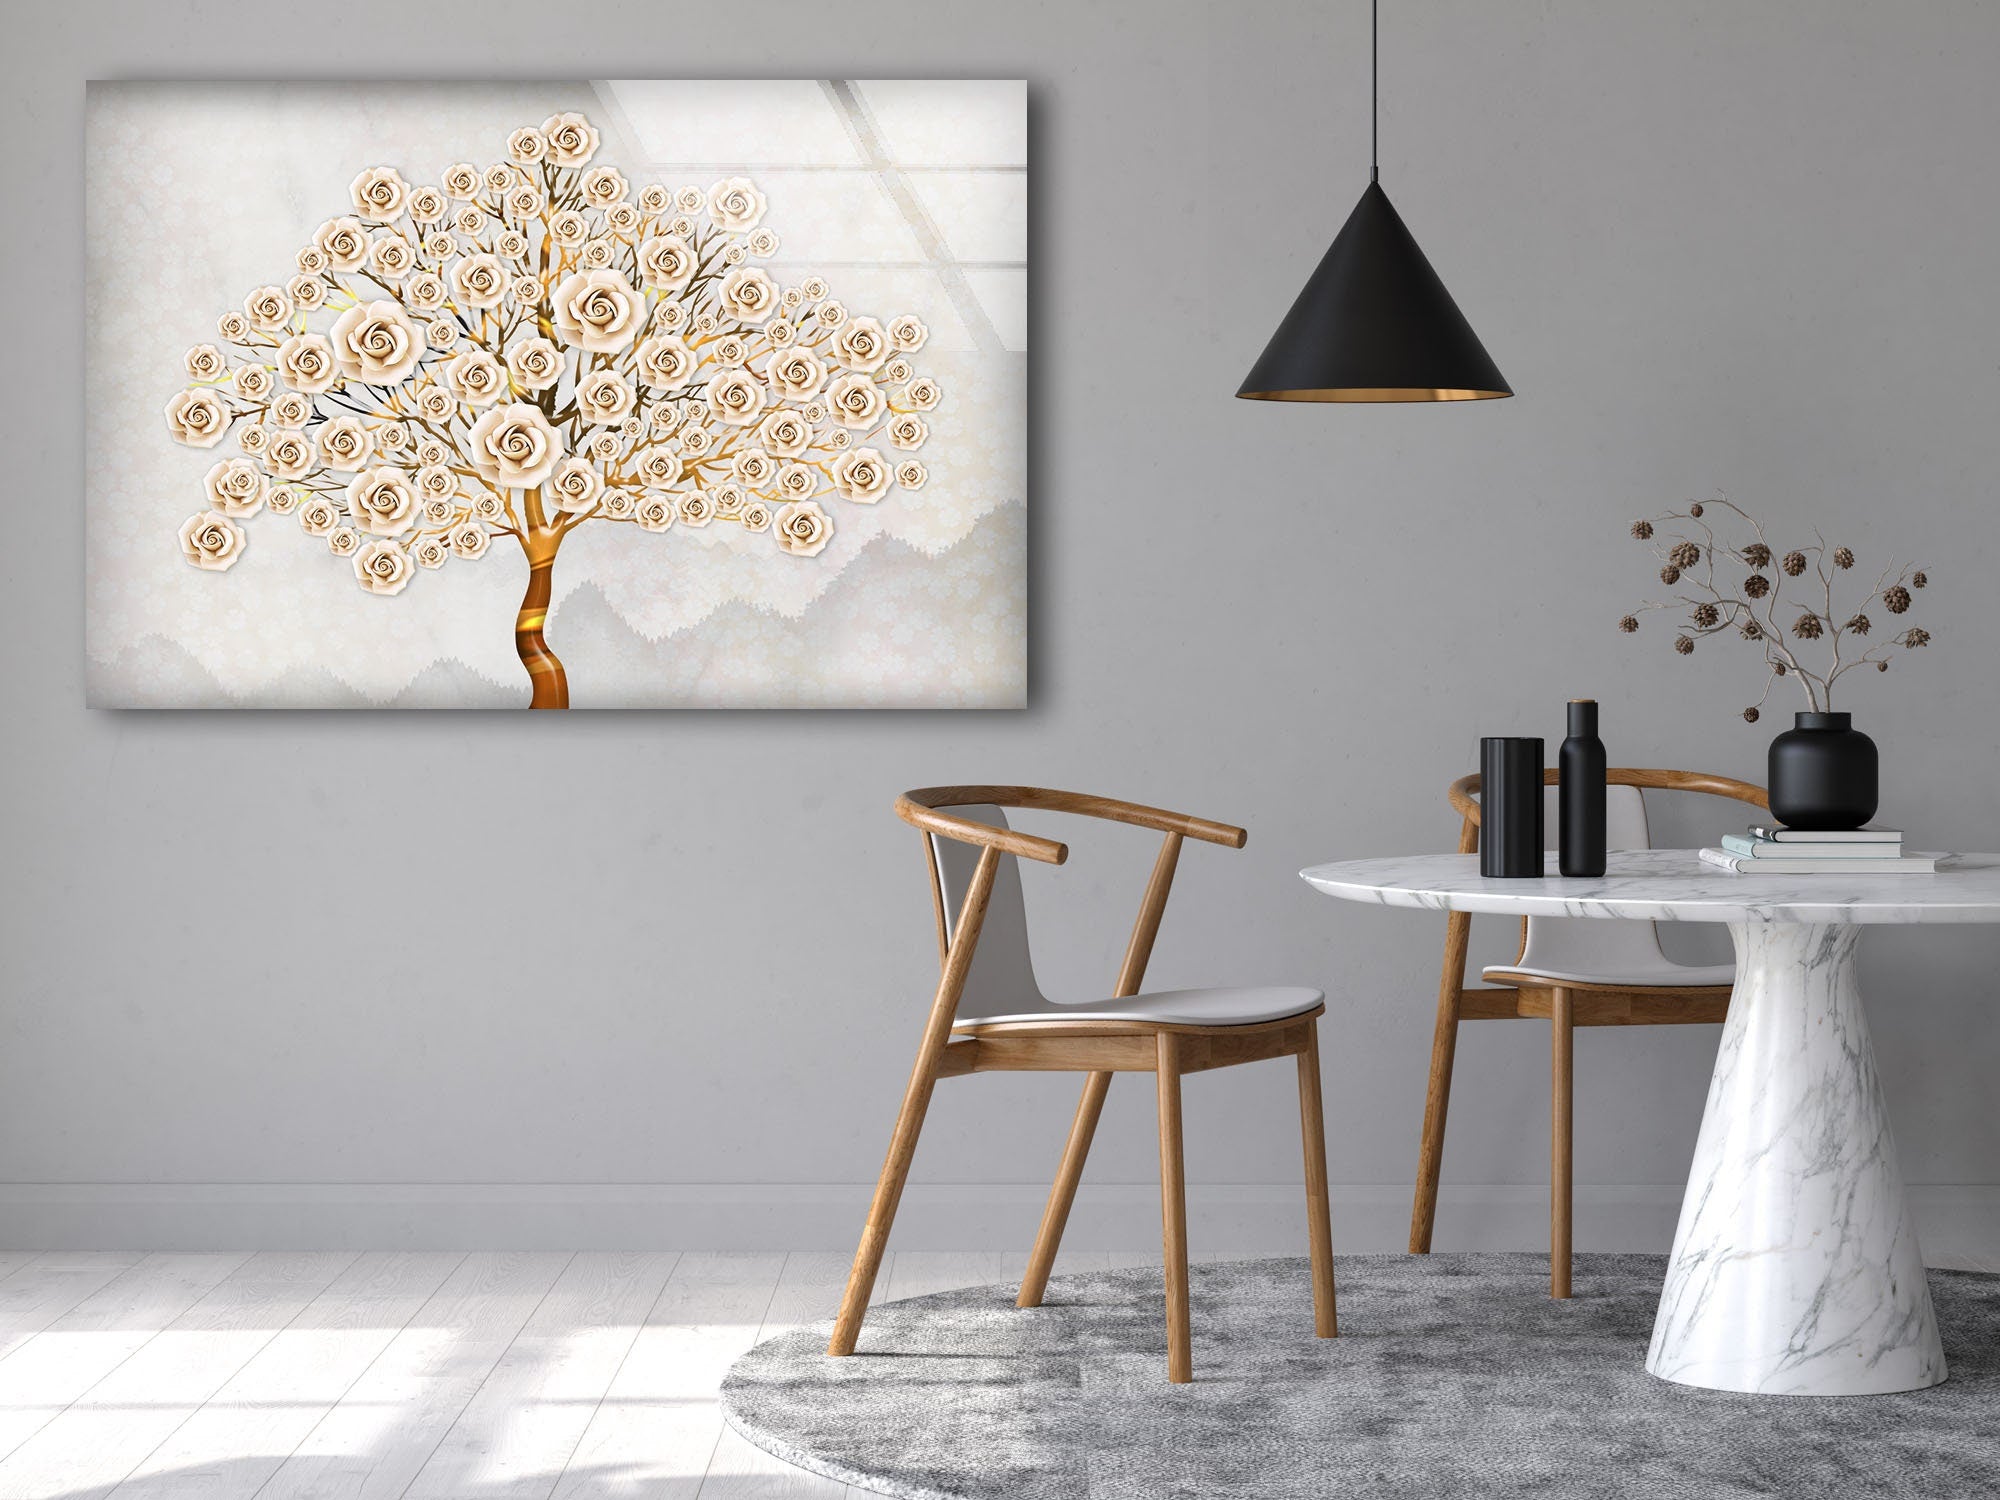 Decorative Floral Tempered Glass Wall Art